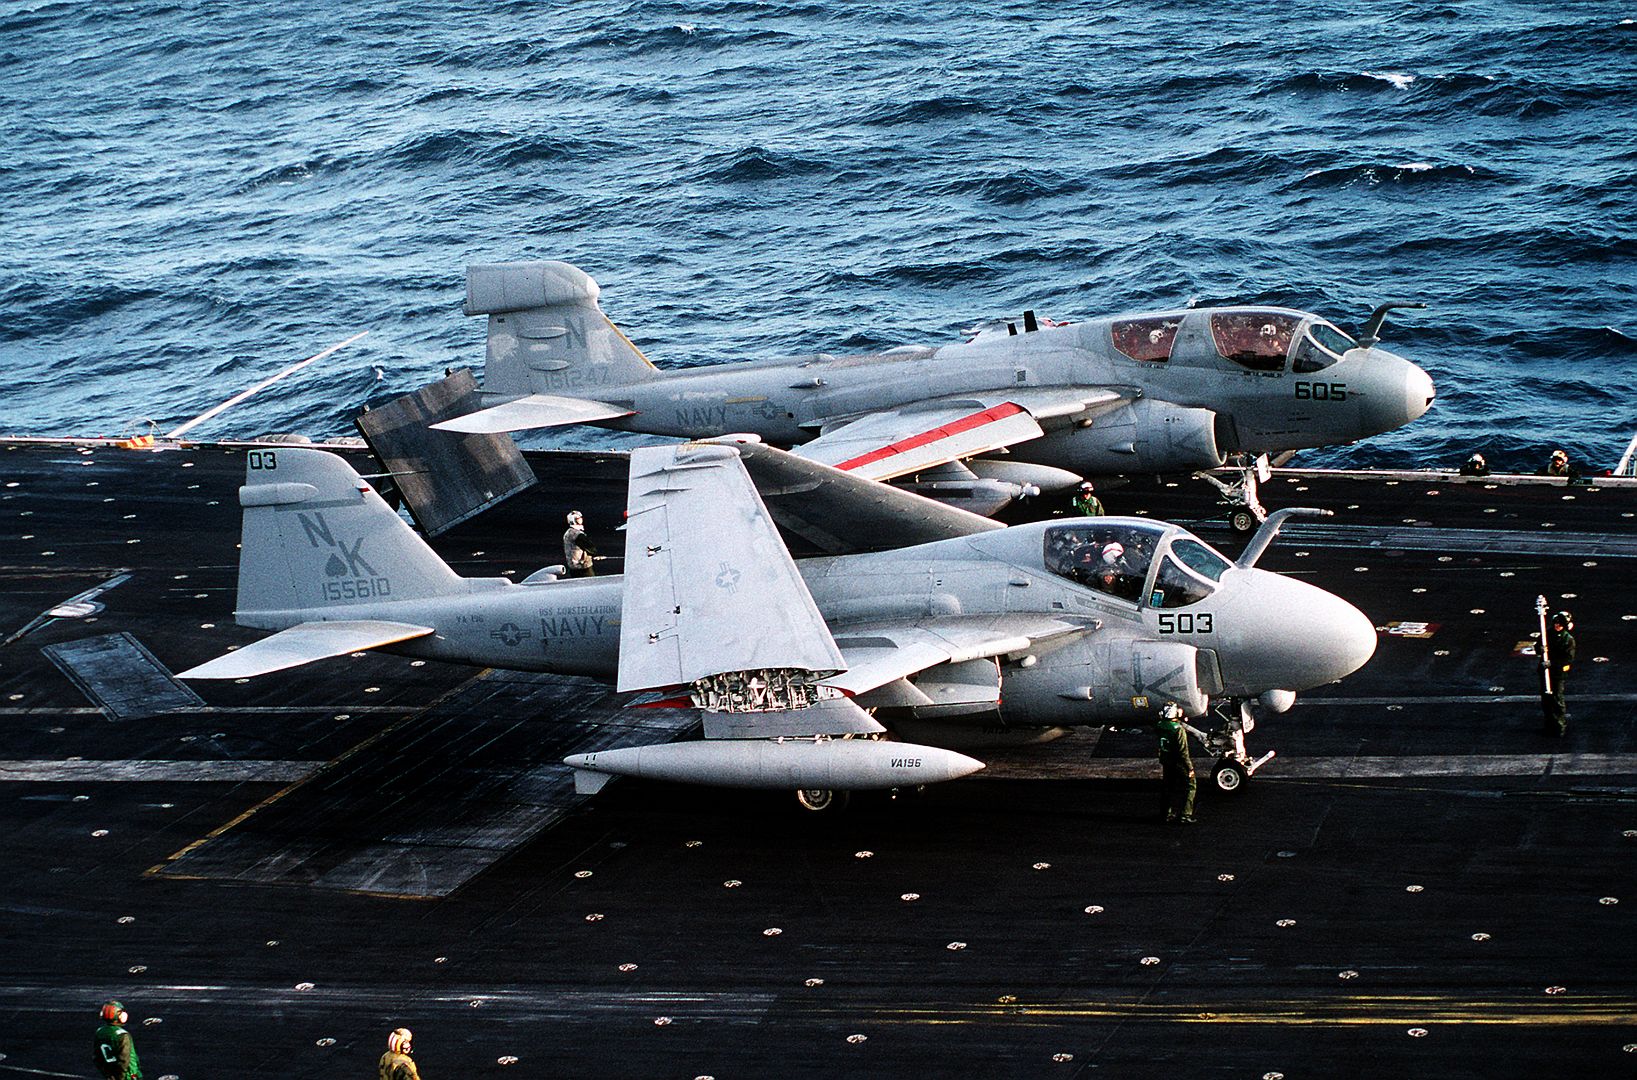 An Attack Squadron 196 A 6E Intruder Aircraft Stands By As An EA 6B Prowler Aircraft Prepares To Launch From The Flight Deck Of The Aircraft Carrier USS CONSTELLATION